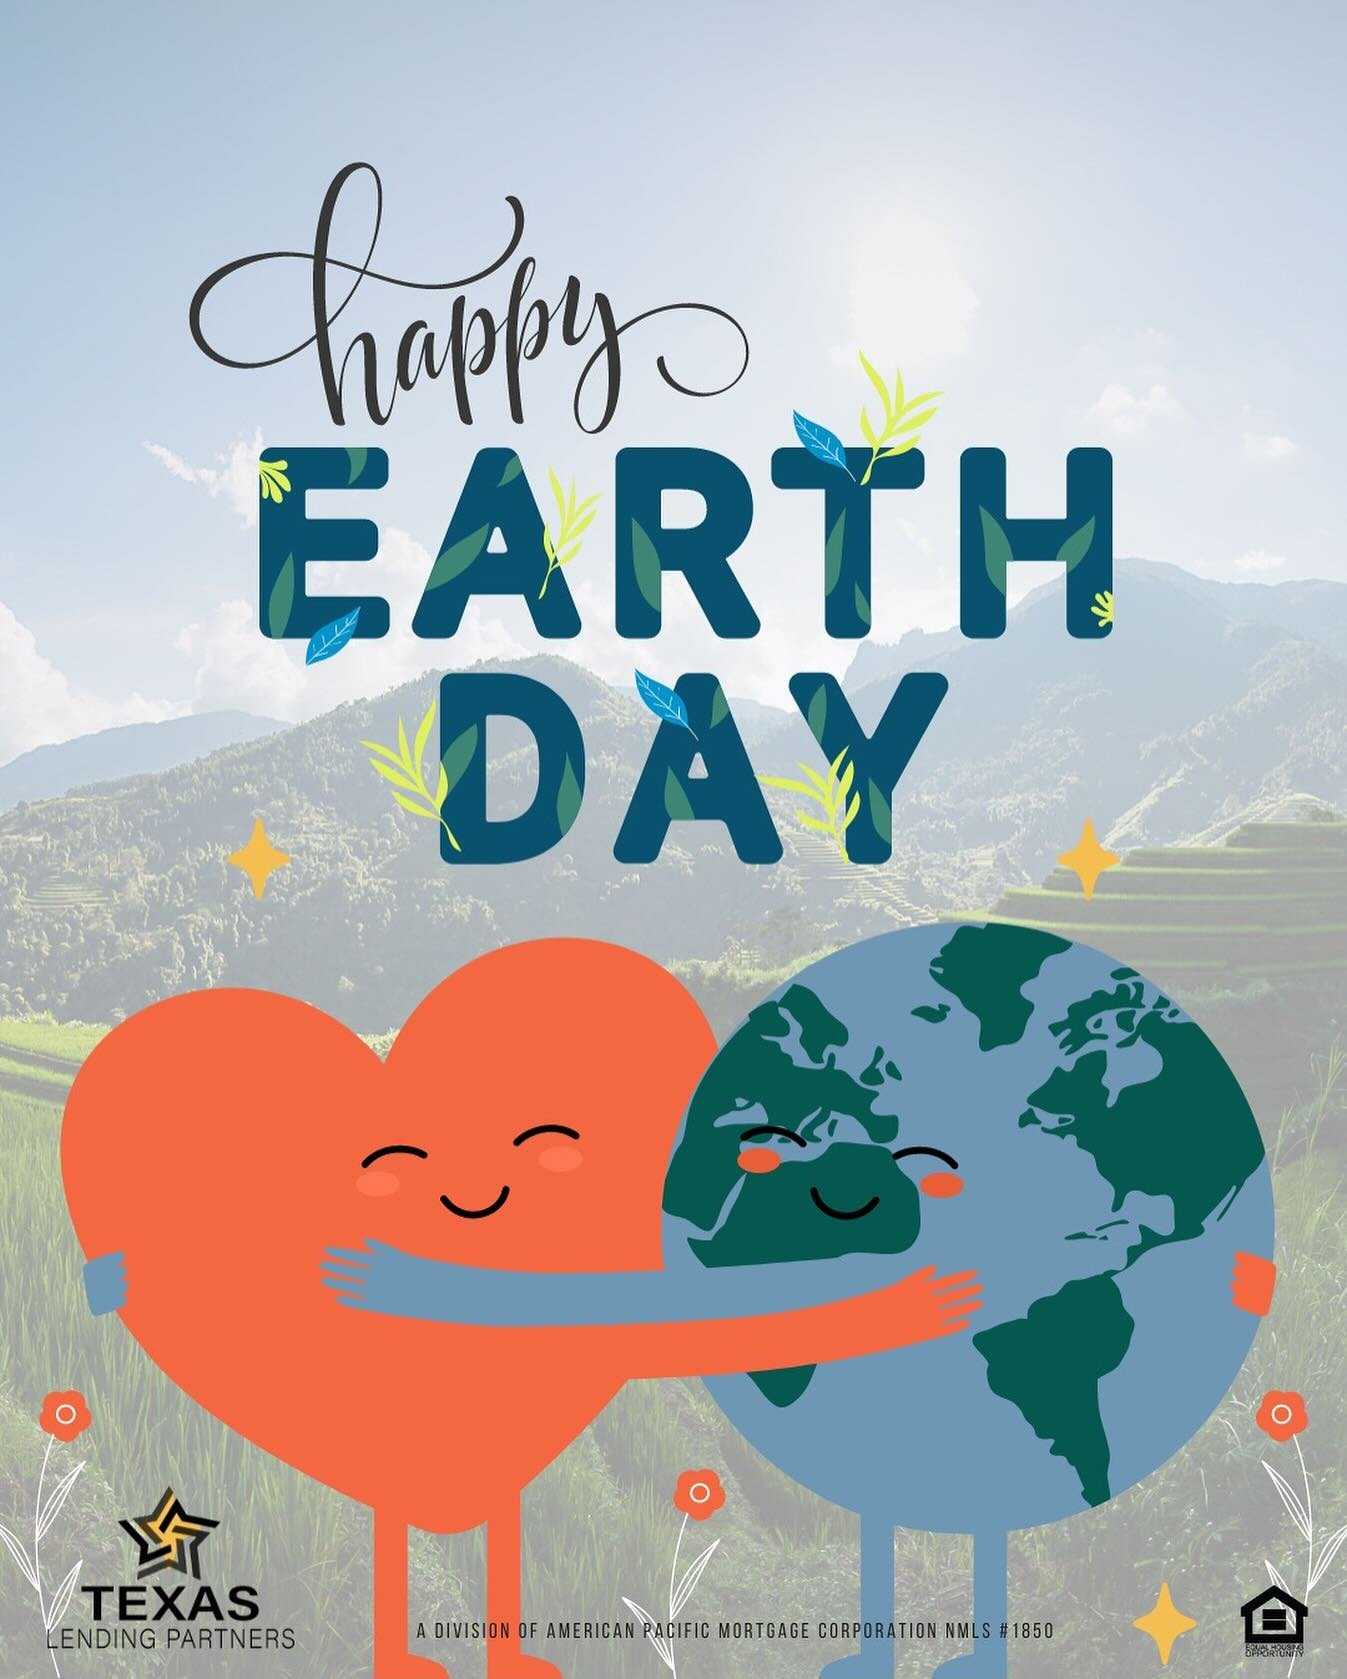 🌍 Happy Earth Day from Texas Lending Partners! 🌱 Today reminds us of the responsibility we share in preserving our planet for future generations.

Let&rsquo;s embrace green living together&mdash;whether it&rsquo;s choosing energy-efficient applianc